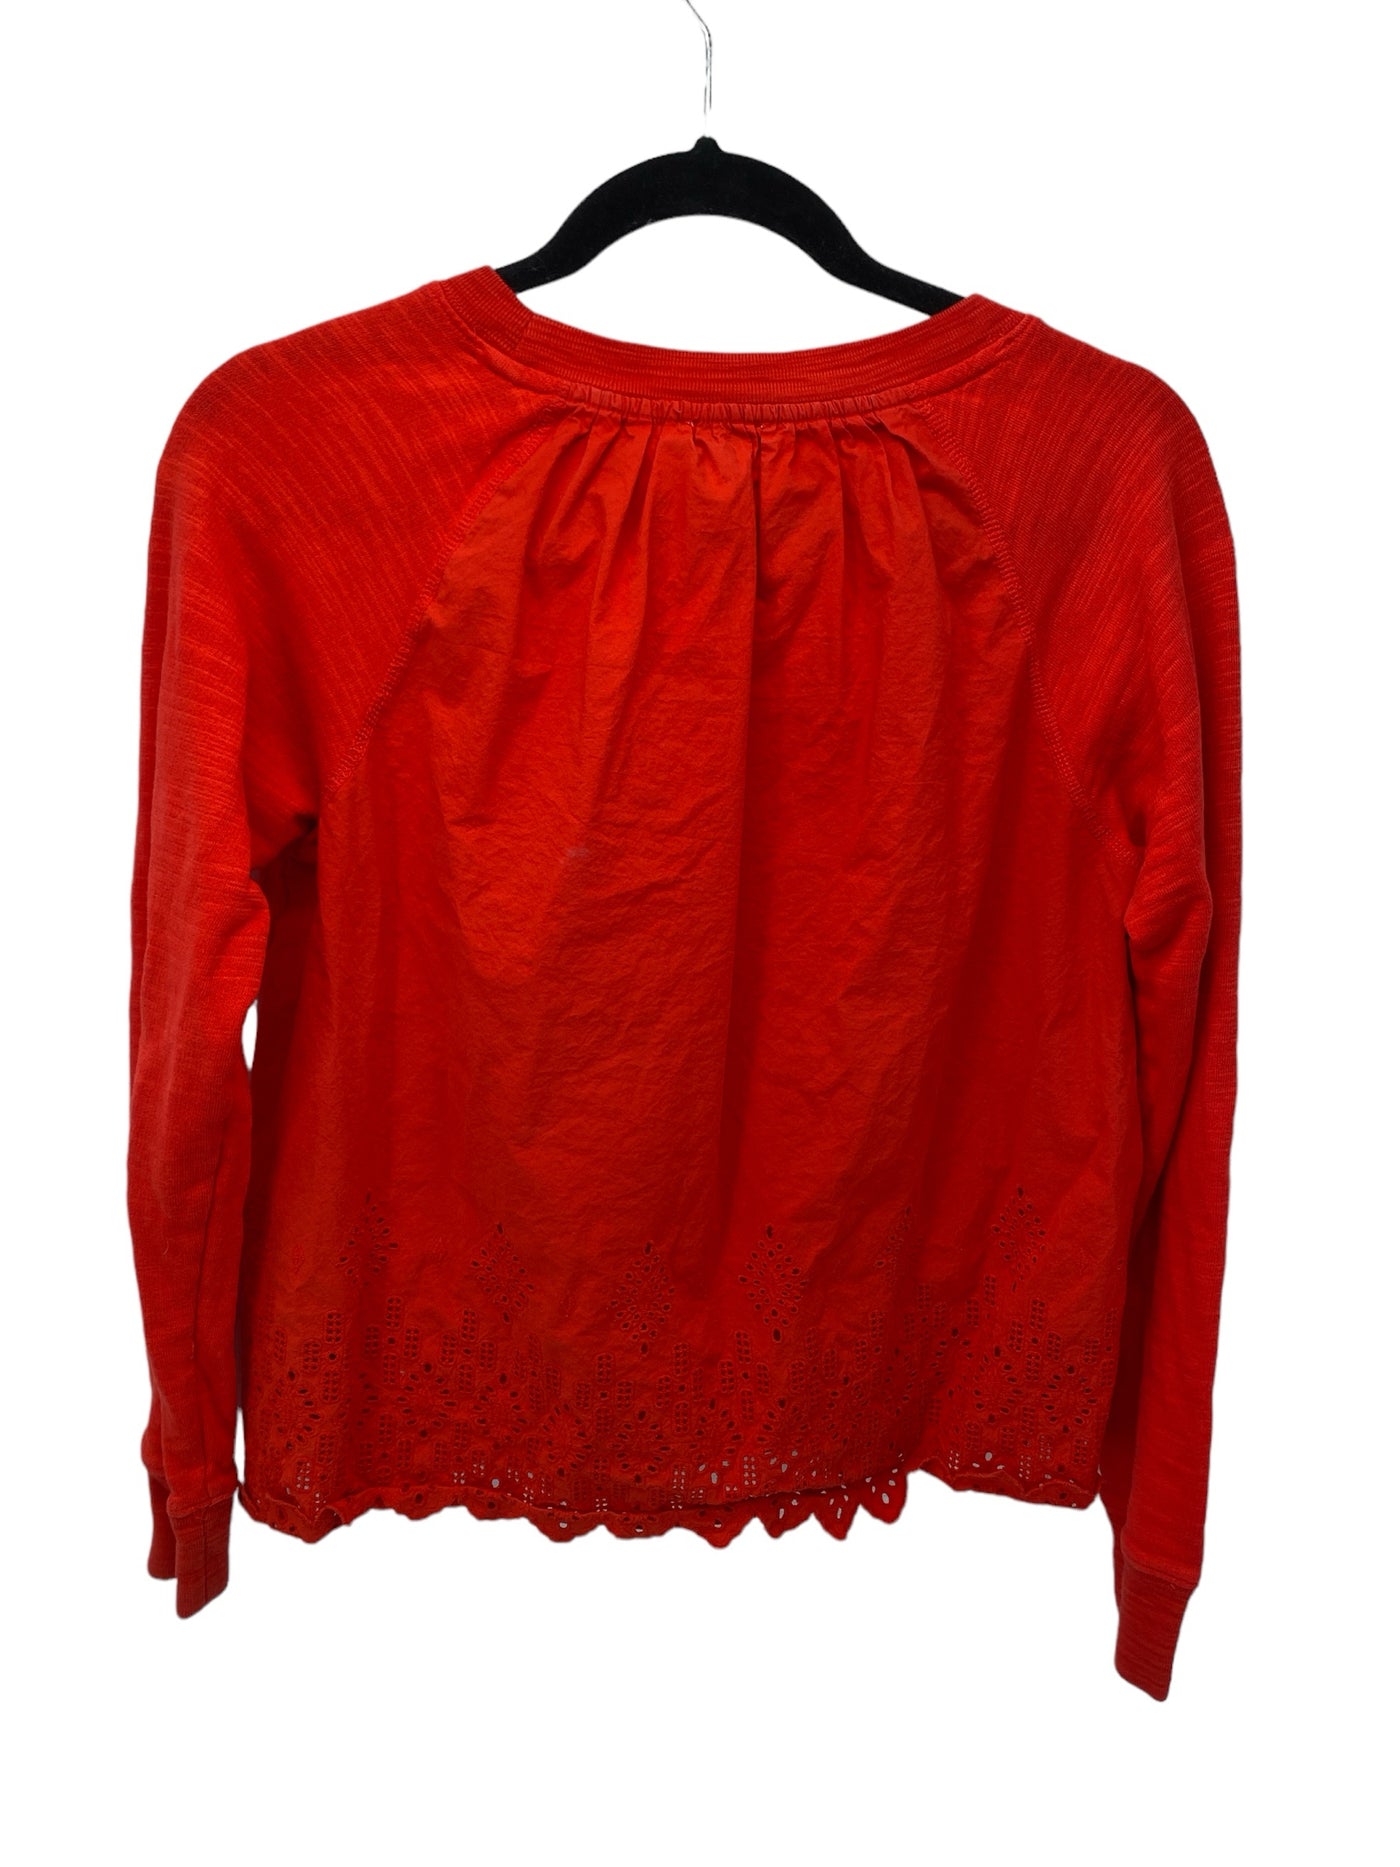 J Crew Misses Size Small Red LS Blouse